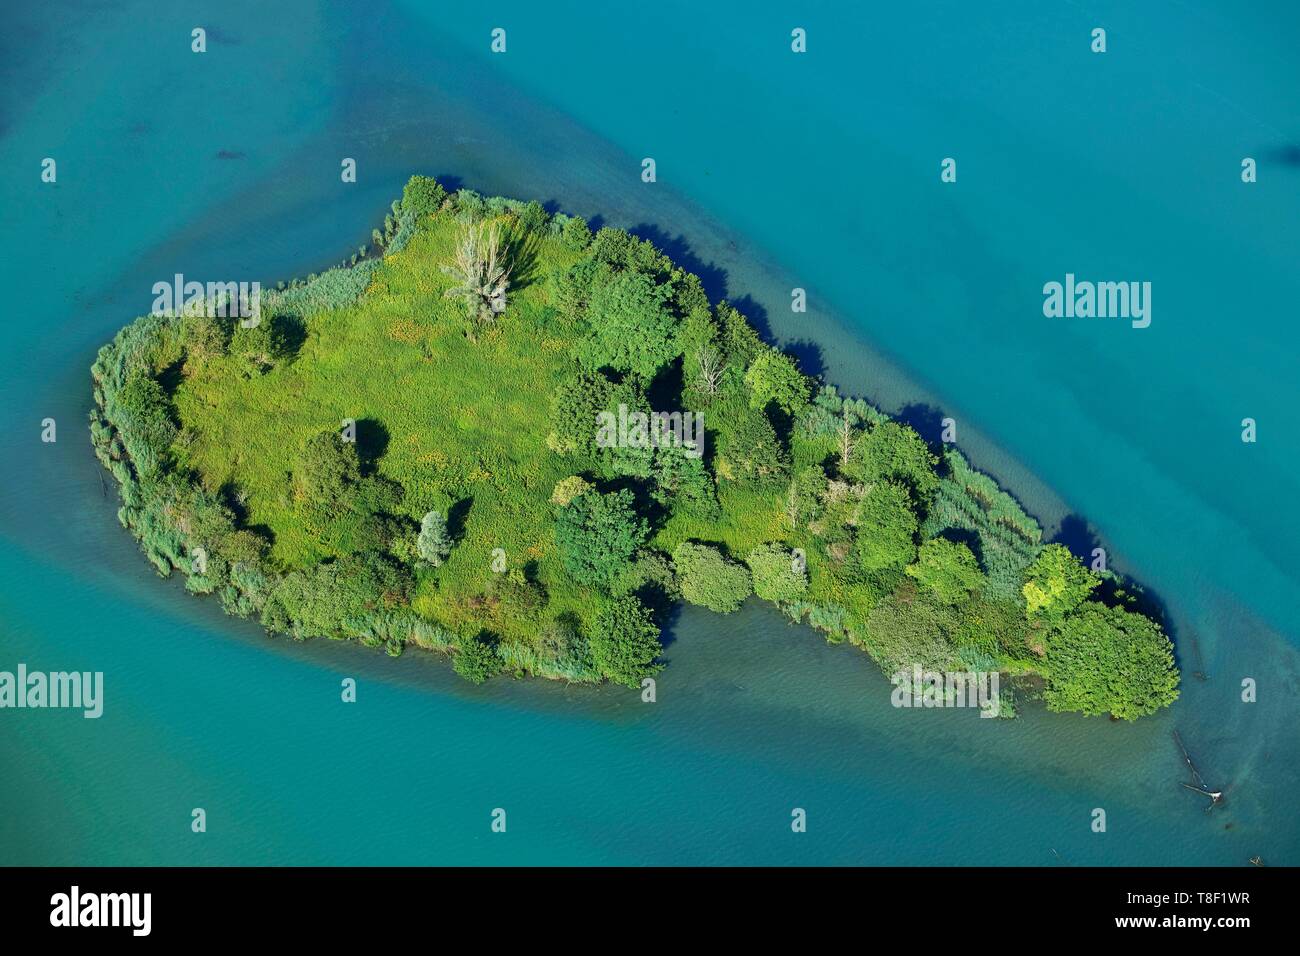 France, Ain, Massignieu de Rives, king's bed lake on the Rhone, bird island (aerial view) Stock Photo